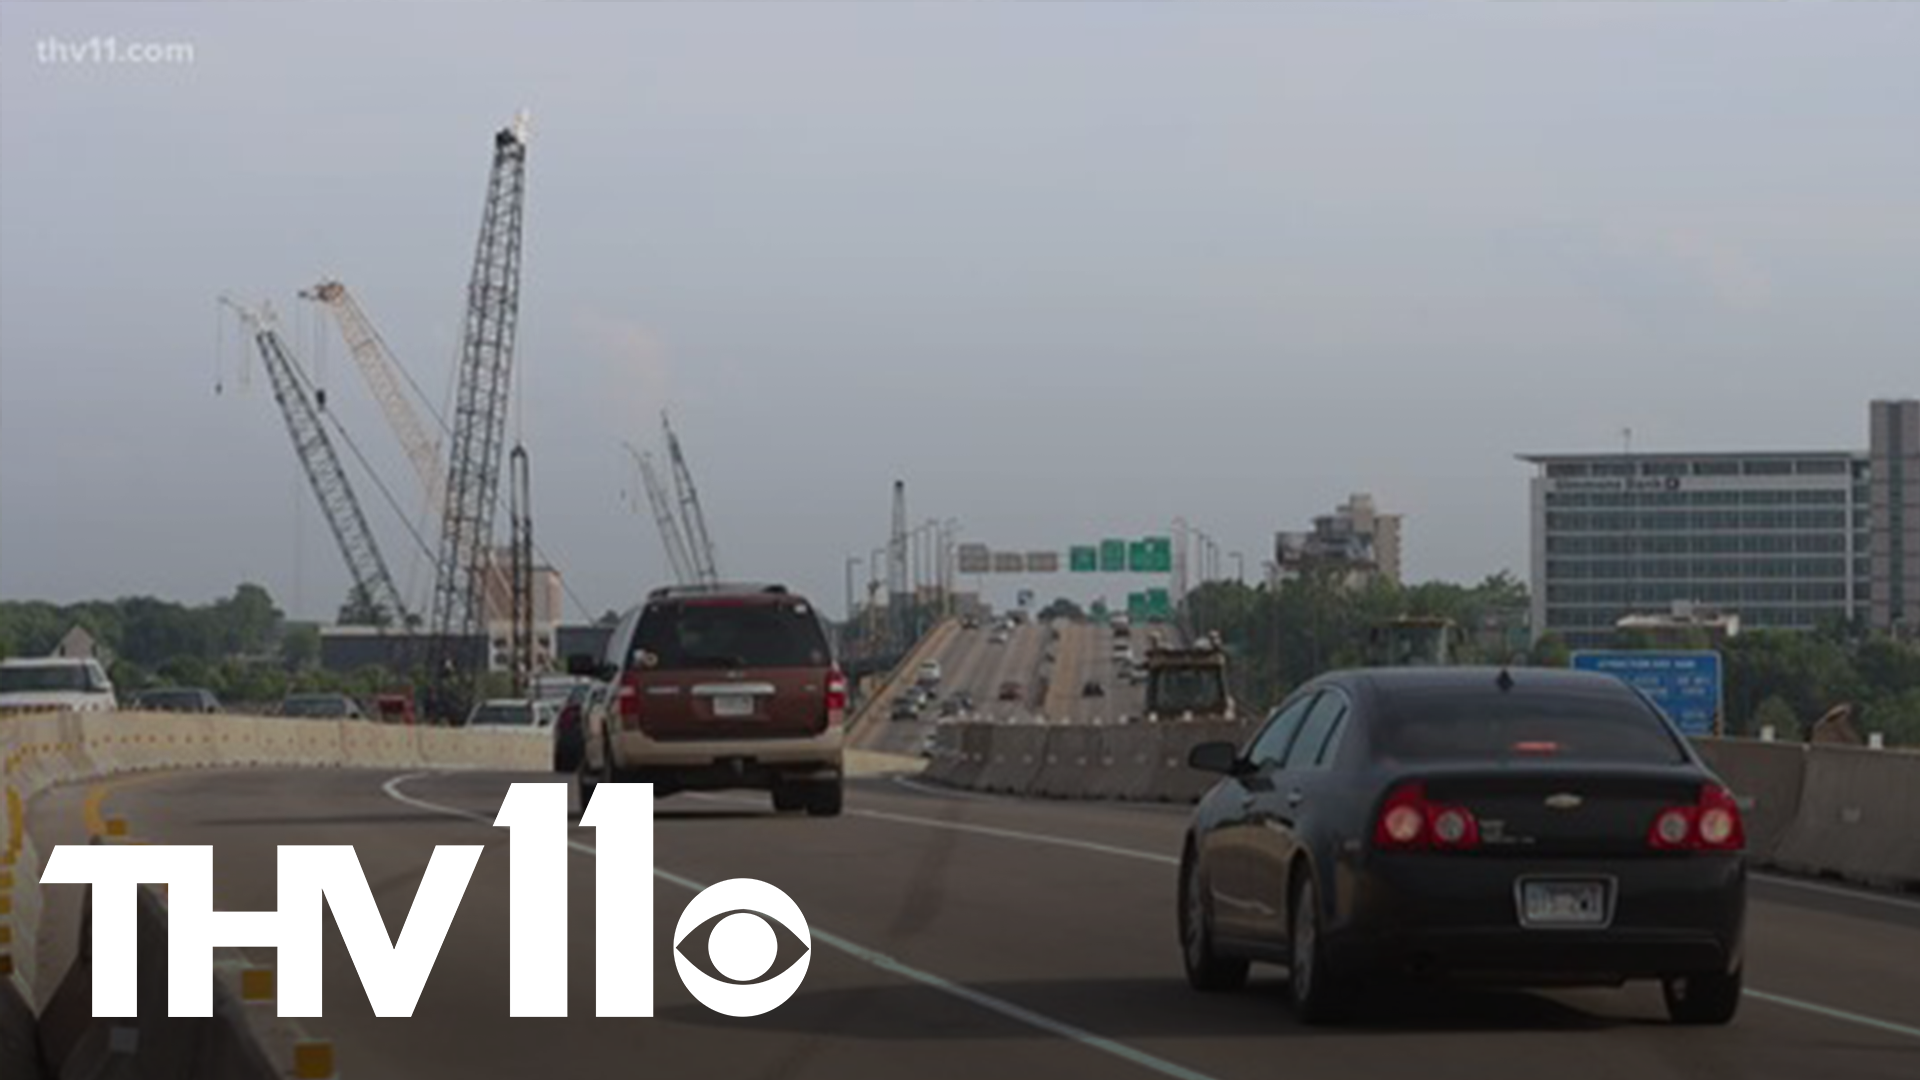 Interstate 30 is back open in downtown North Little Rock after a major closure. Weekend crews completed installation of a temporary platform on I-40.